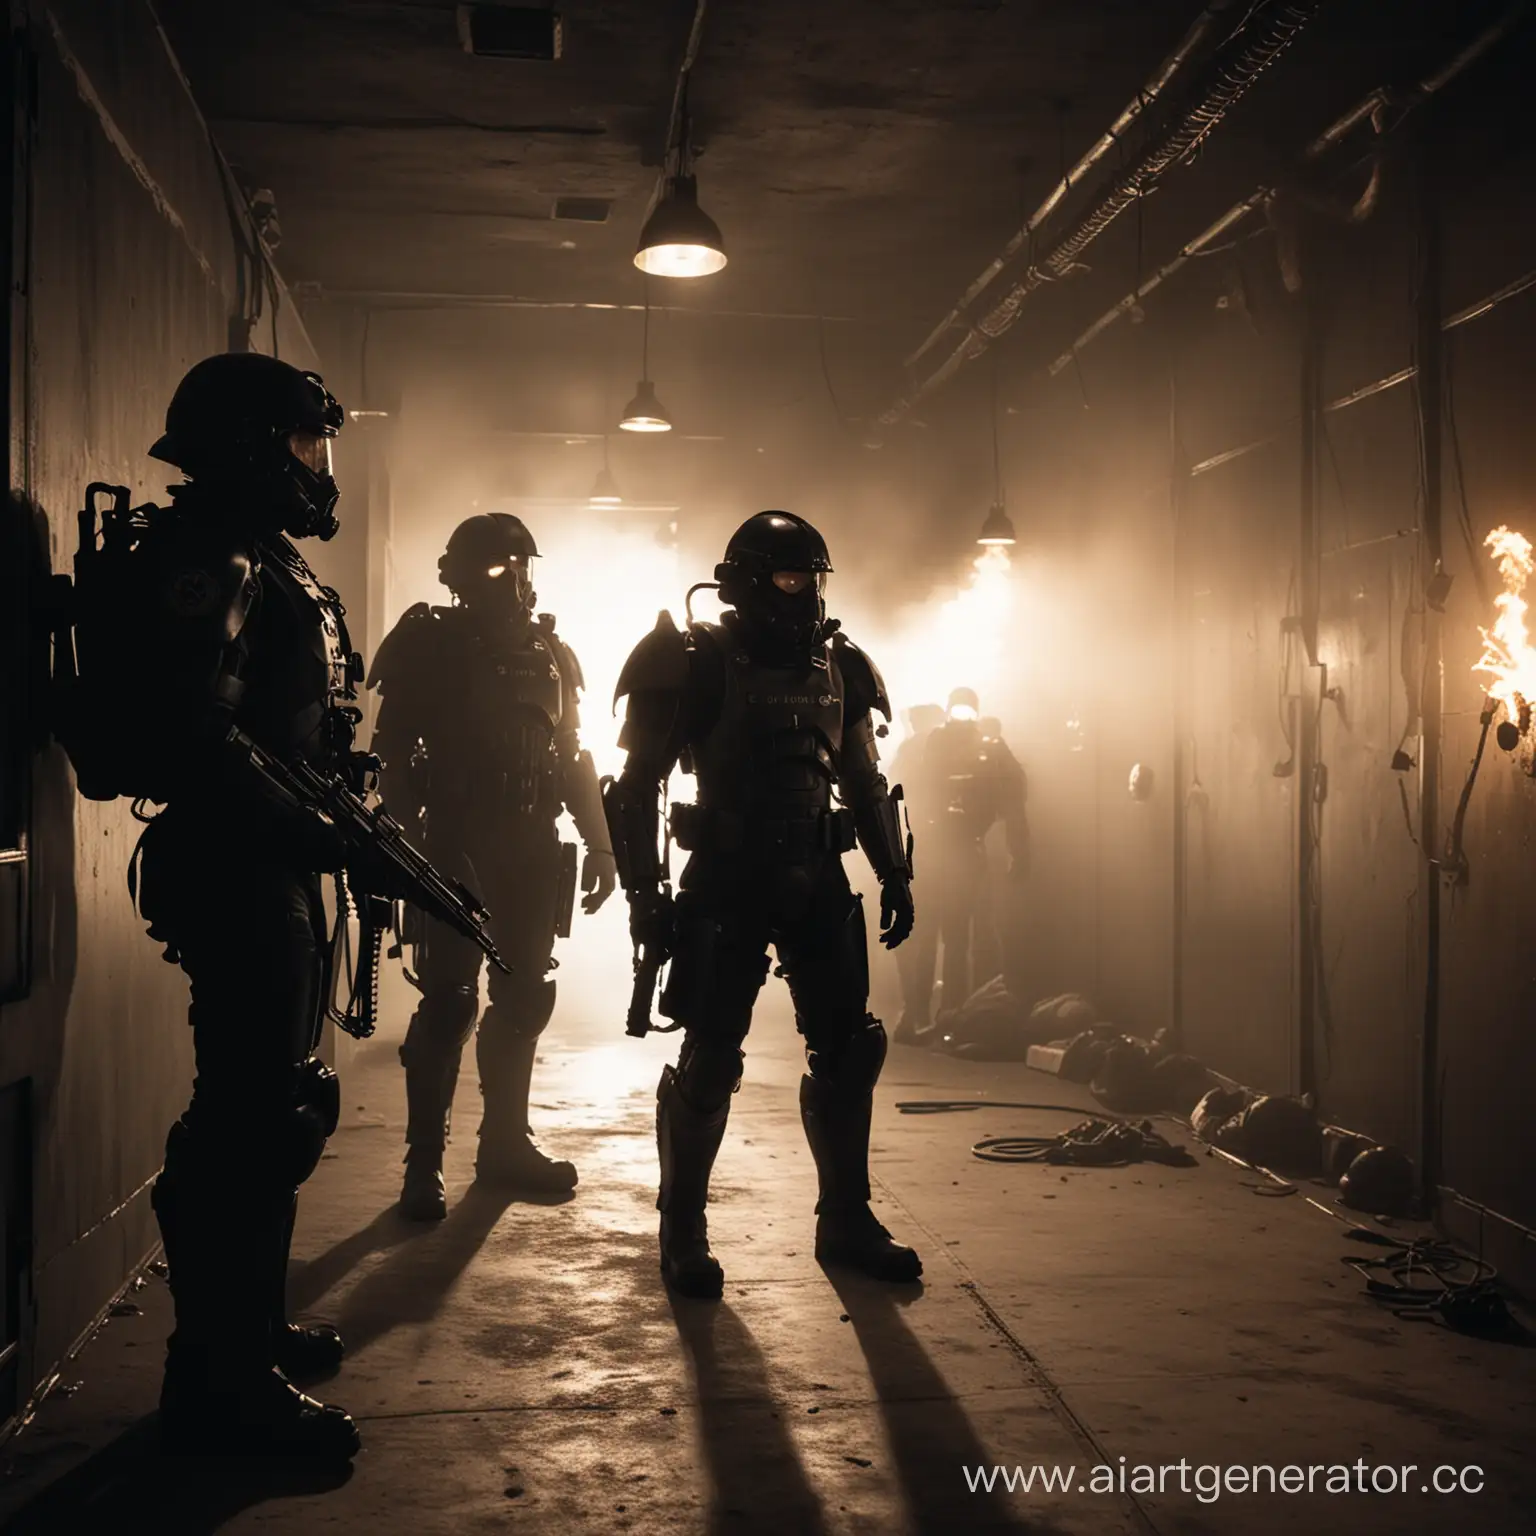 Intimidating-Soldiers-in-Black-Power-Armor-Stand-Guard-in-Shadowy-Room-with-Dim-Light-SS13